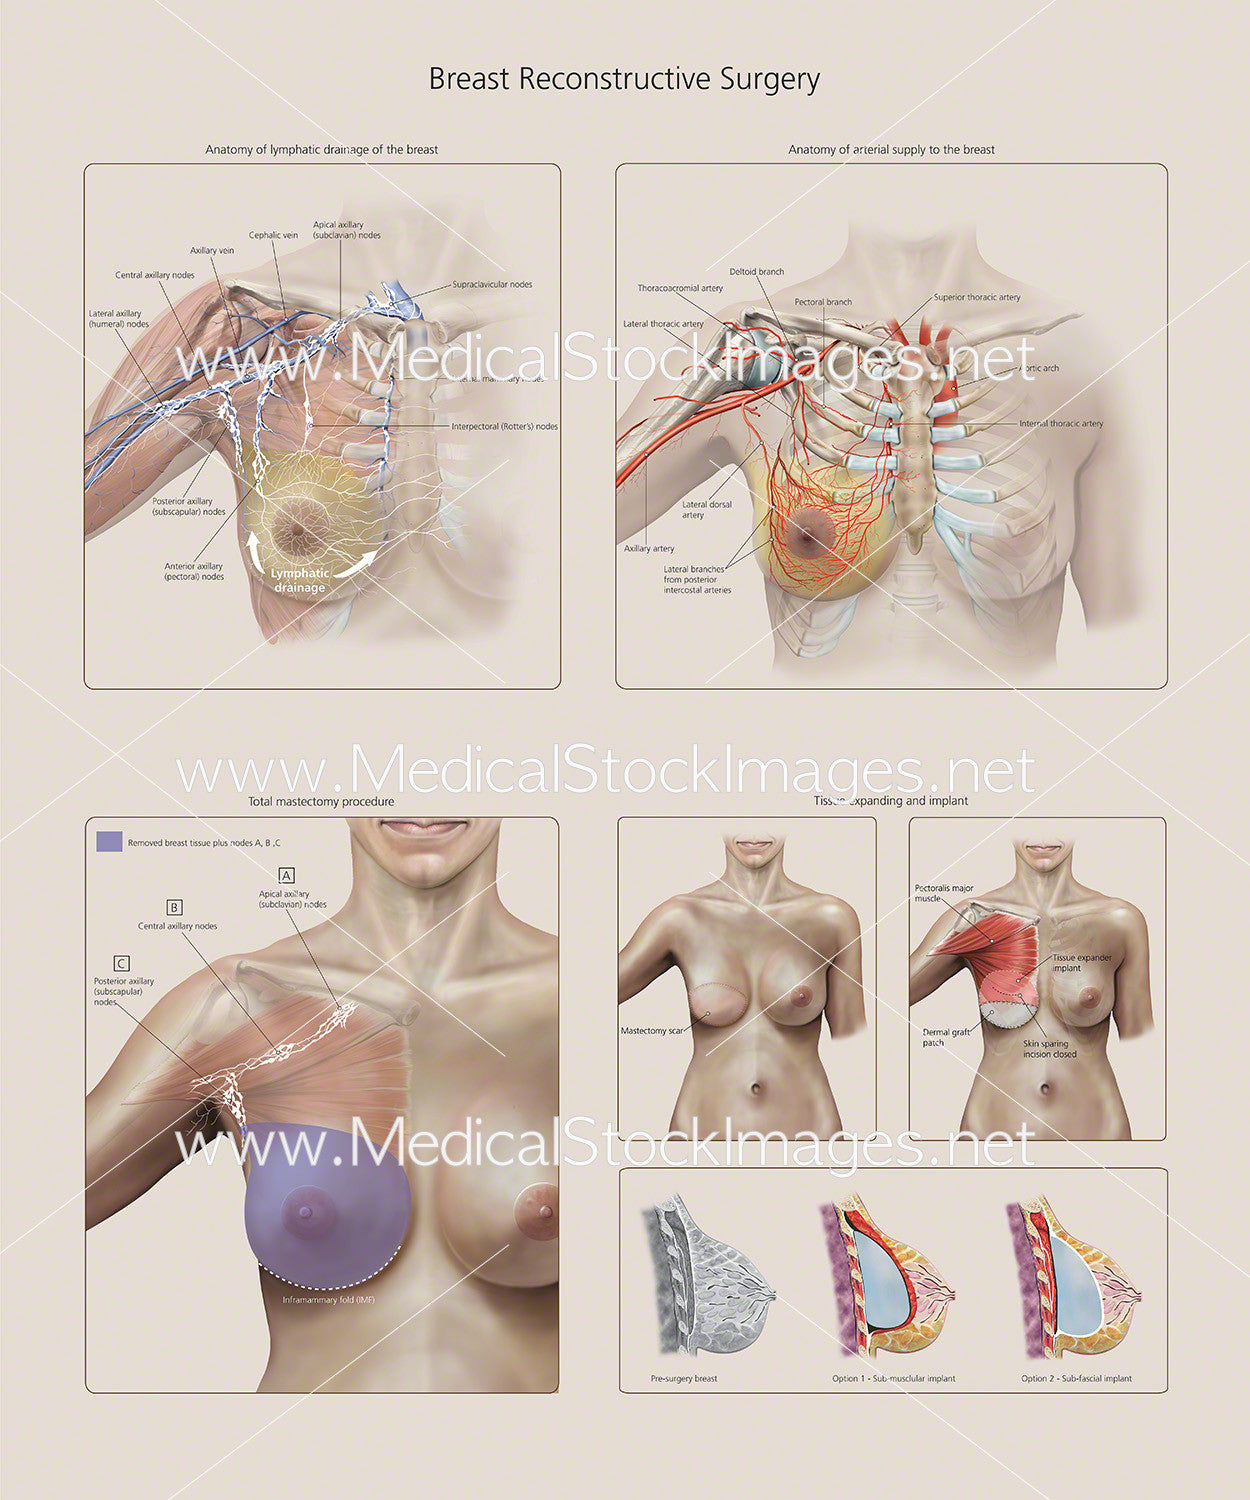 Chart of Breast Reconstructive Surgery – Medical Stock Images Company